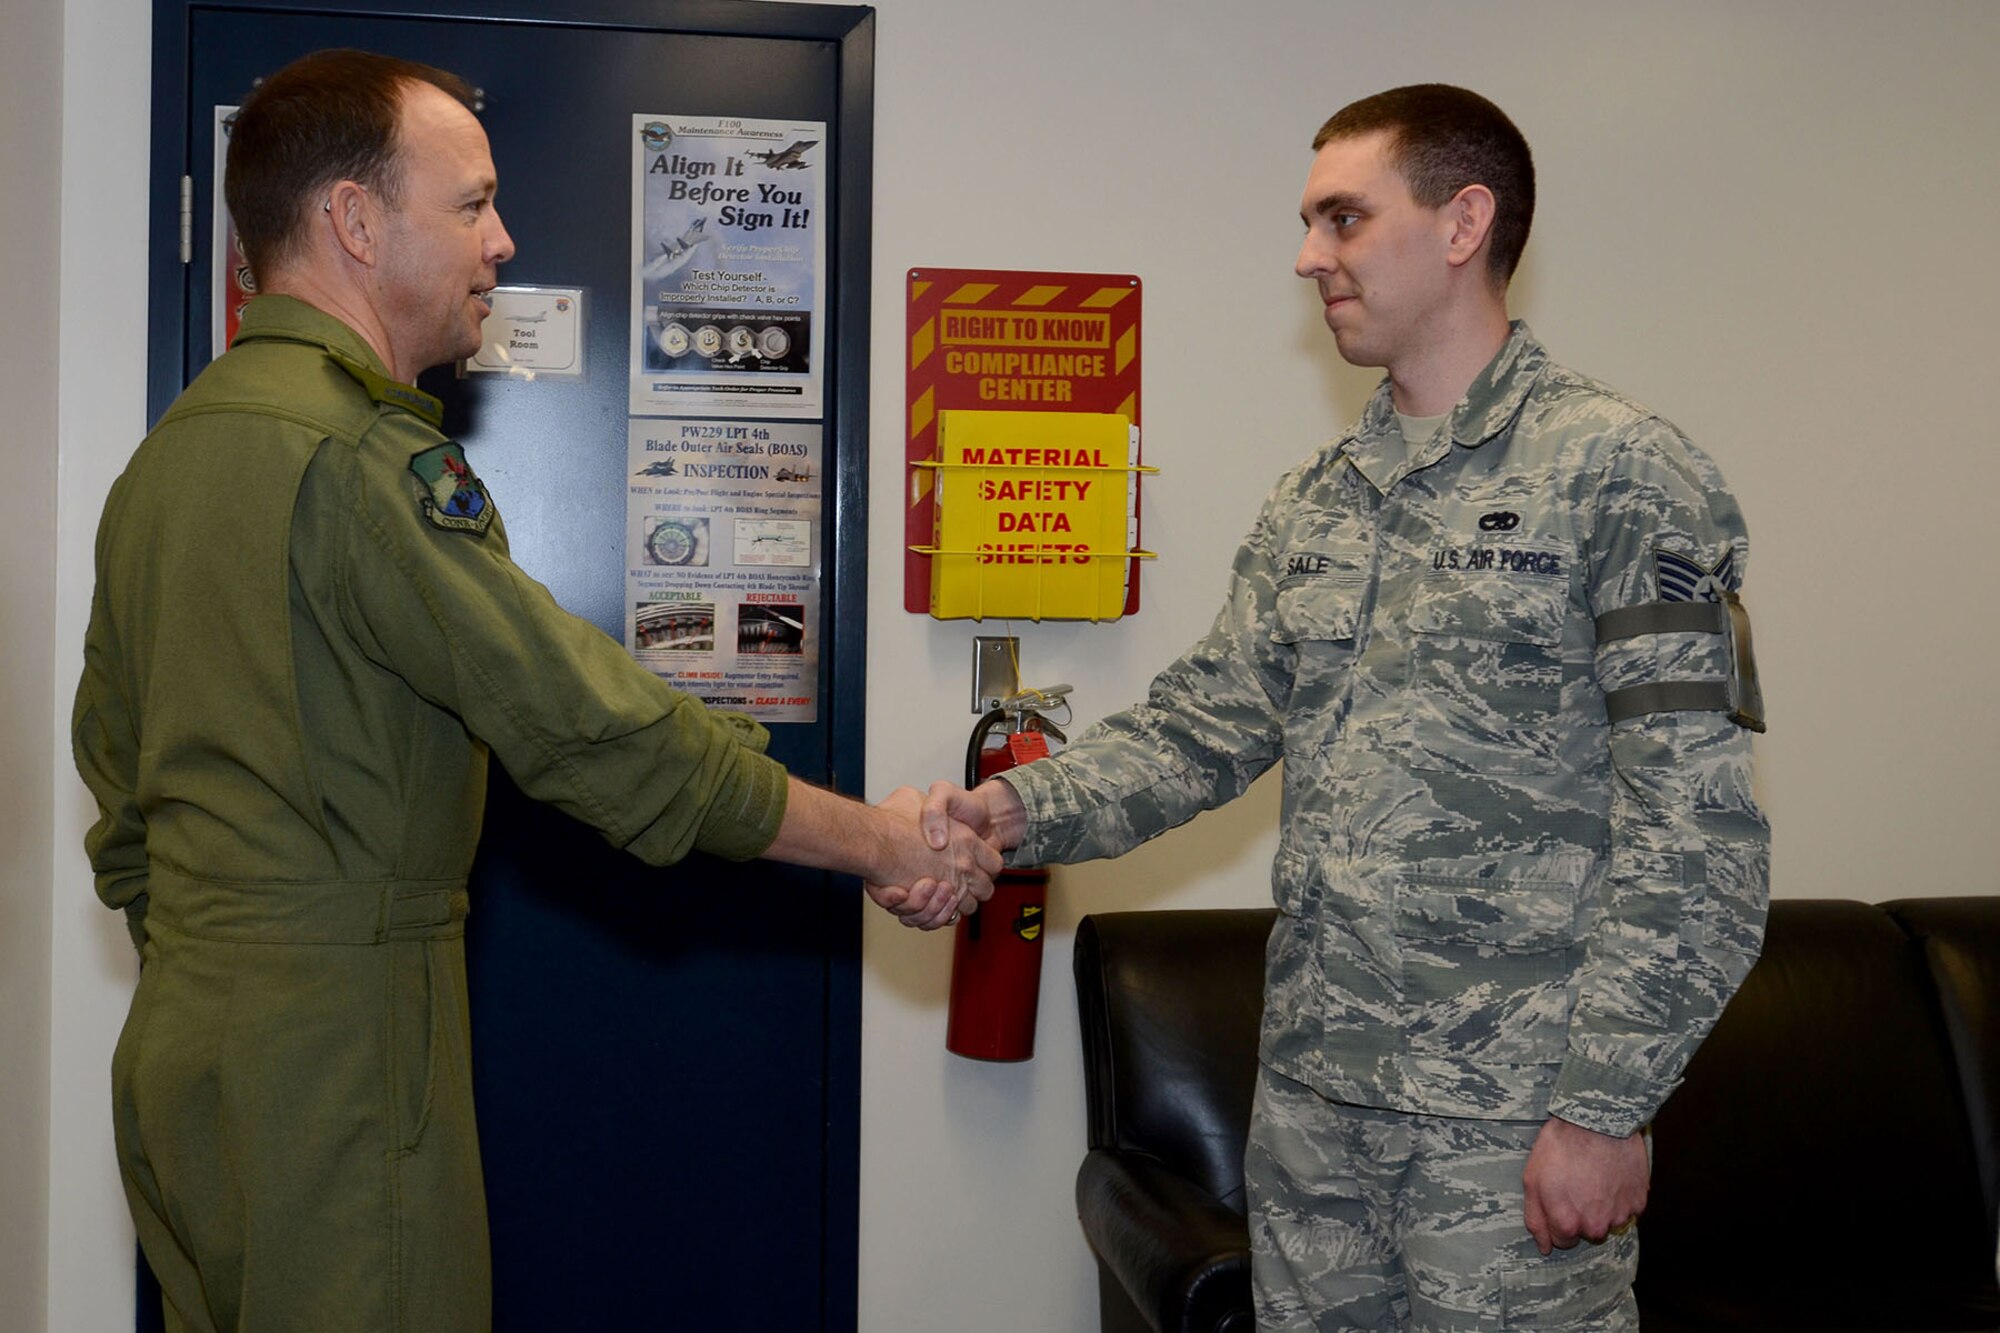 Canadian Forces Brig. Gen. Alain Pelletier, deputy commander Continental United States NORAD Region (CONR), receives and orientation flight on an F-16 Fighting Falcon fighter jet accompanied by Lt. Col. Ian Toogood, commander of the 169th Aerospace Control Alert Squadron, during his visit to the South Carolina Air National Guard's 169th Fighter Wing at McEntire Joint National Guard Station, Mar. 1, 2016. During his visit, Brig. Gen. Pelletier spoke to wing leadership about its homeland defense mission and the relationship it has with the NORAD air component as it is tasked through CONR to ensure North American airspace control. The 169th FW has provided support for numerous CONR training and air defense events in past years. (U.S. Air National Guard photo by Airman 1st Class Megan R. Floyd) 